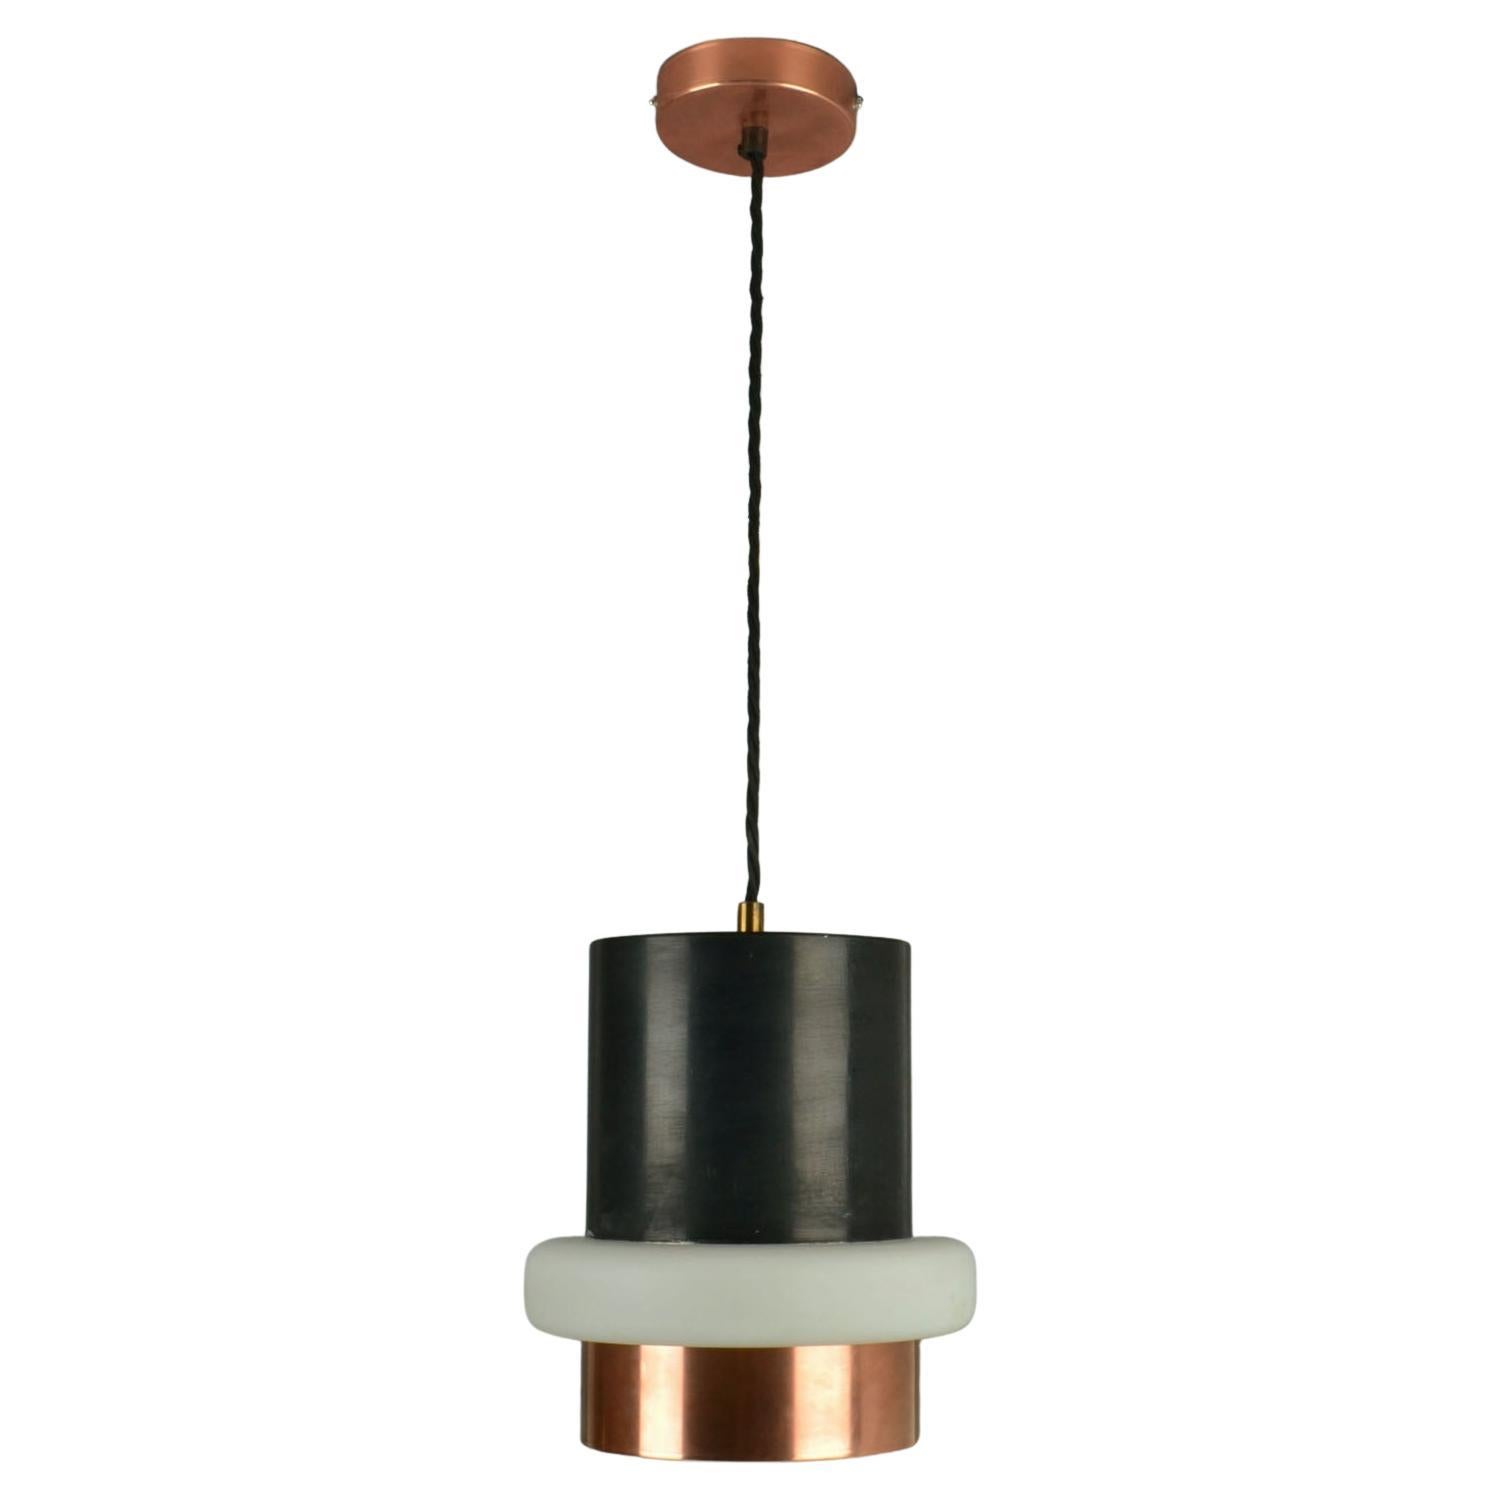 Modernist pair of Philips pendant lamps model Locarno, designed by Louis Kalff for the leading Dutch lighting manufacturer Philips, circa 1960. Made of thee materials, top cylindrical structure in black lacquered metal with opaline glass